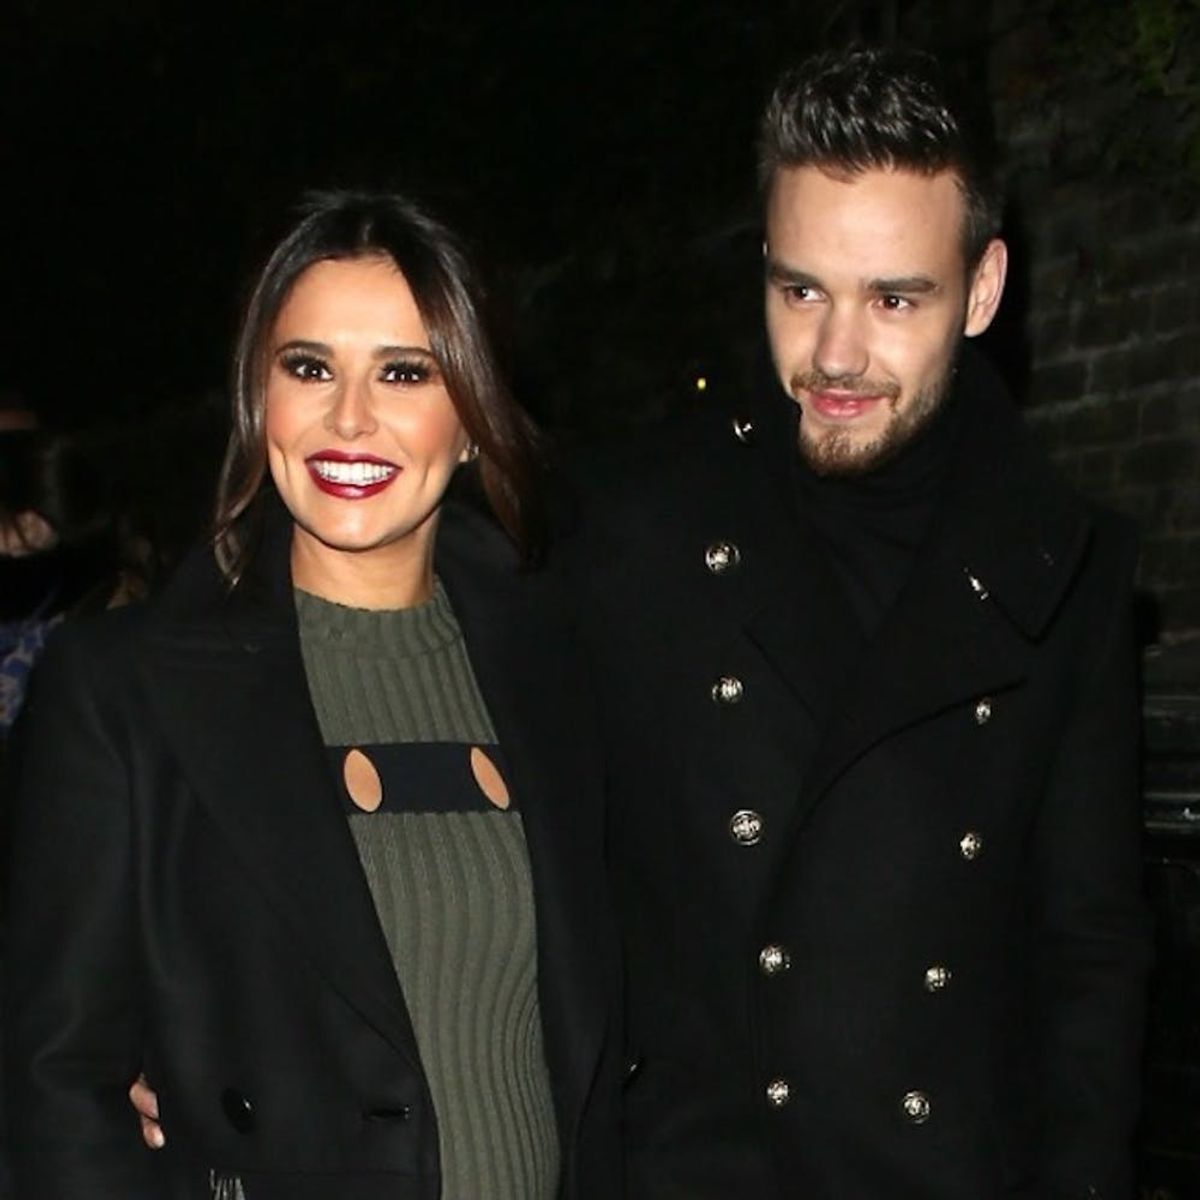 Cheryl Cole and Liam Payne Are the Proud Parents of a Baby Boy